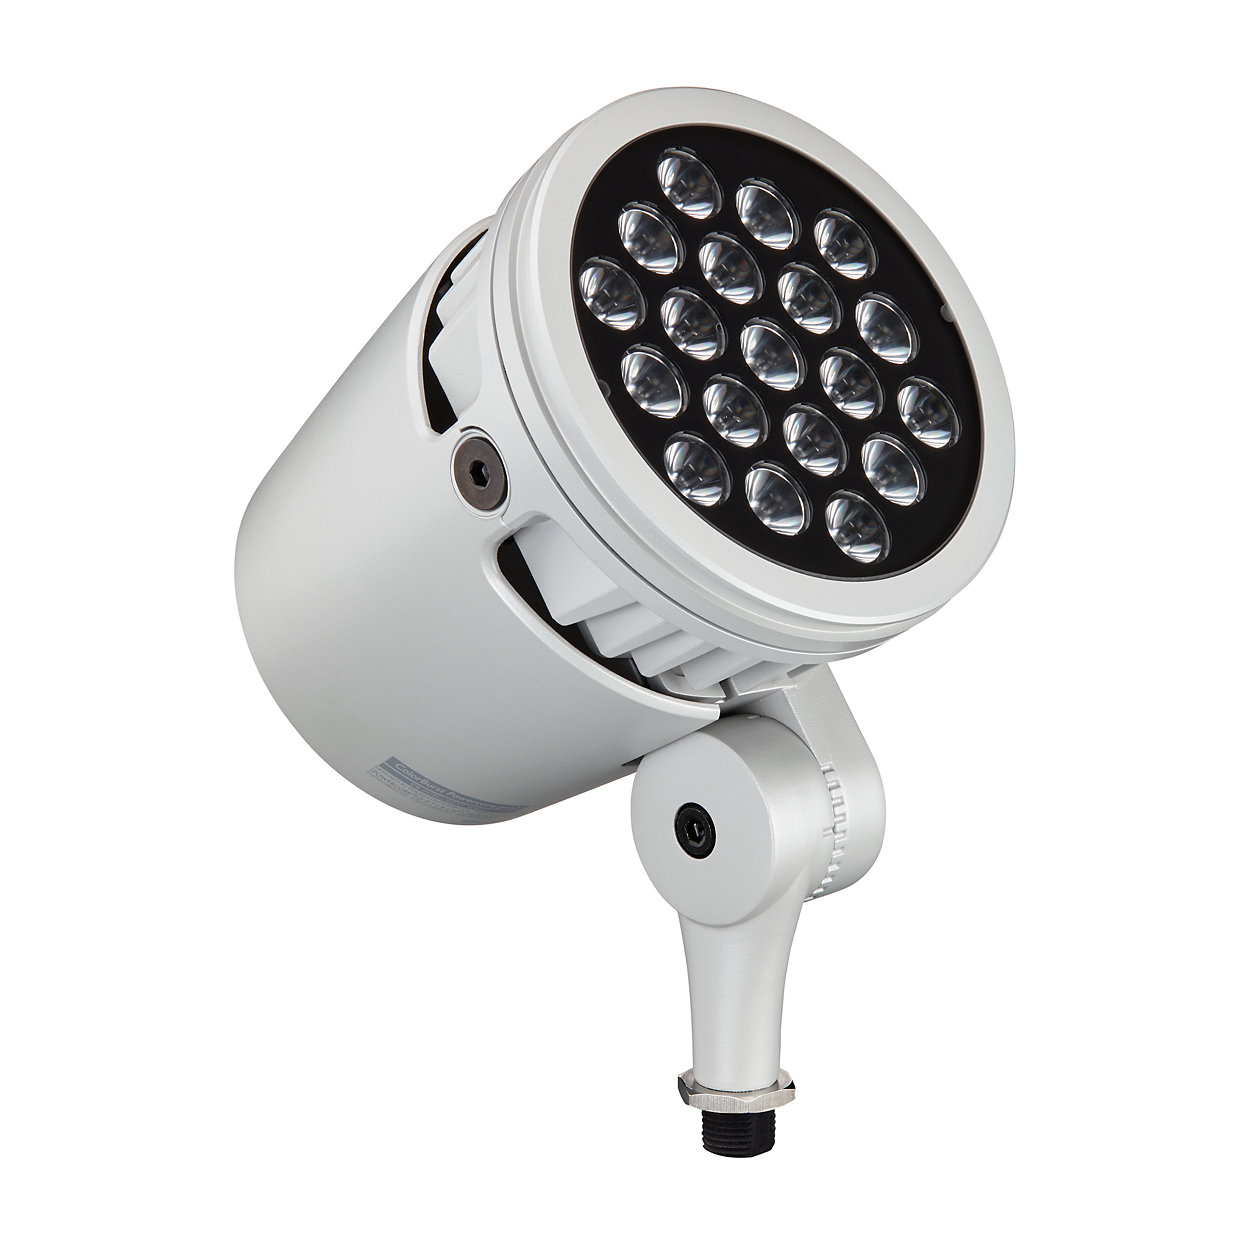 Architectural and Landscape LED spotlight with intelligent colour light